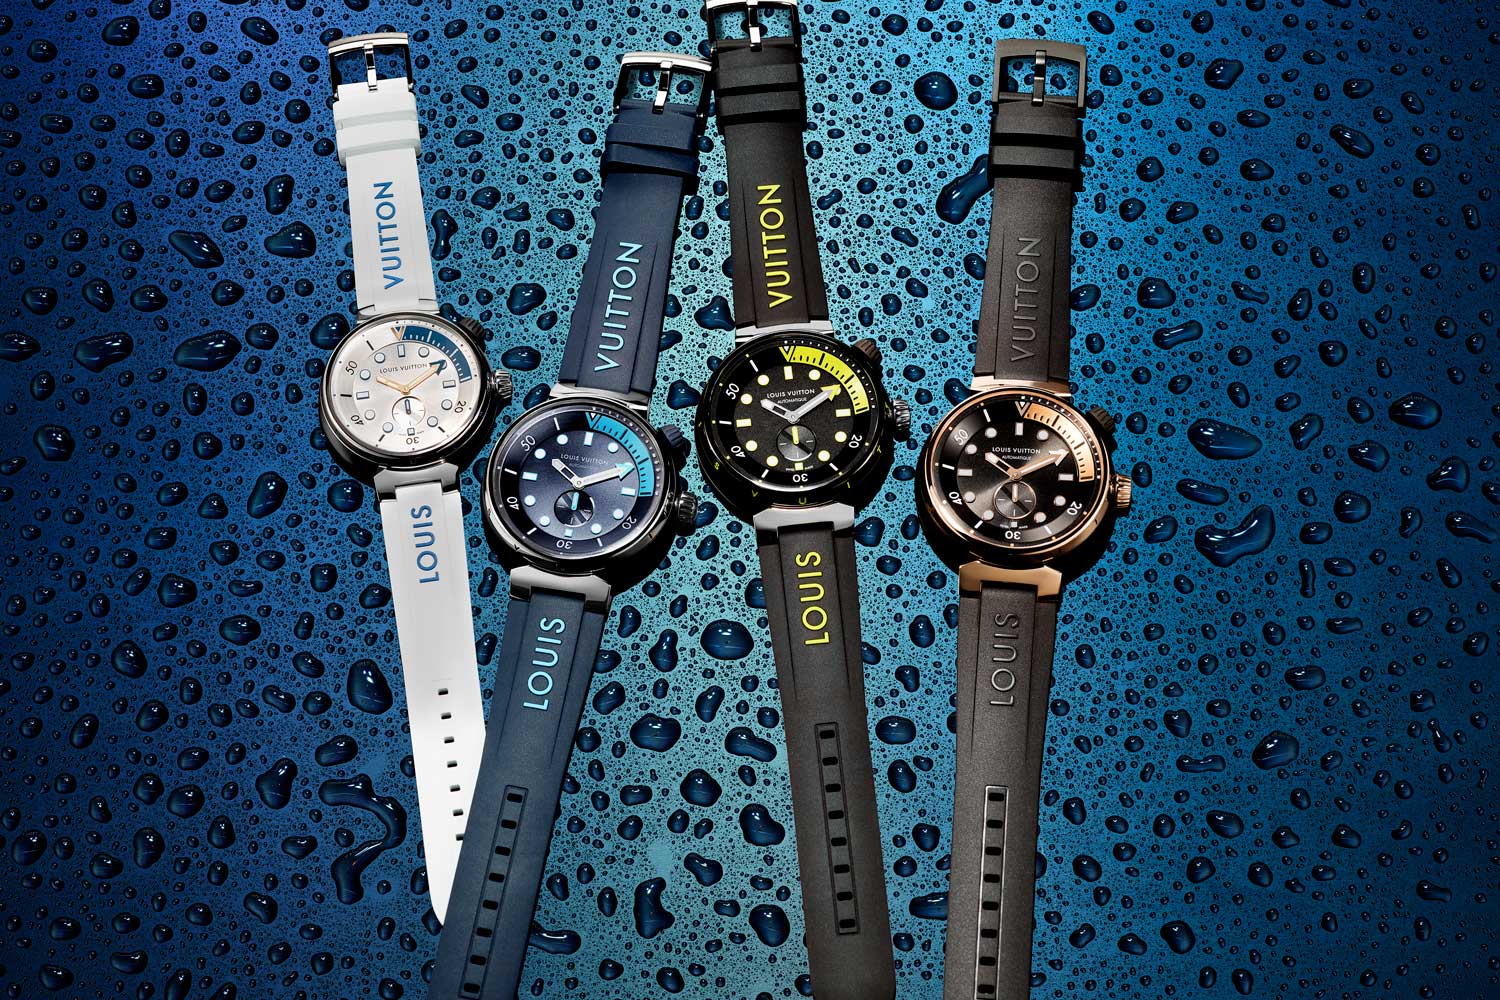 The new Louis Vuitton Tambour Street Diver in four lively colorways.